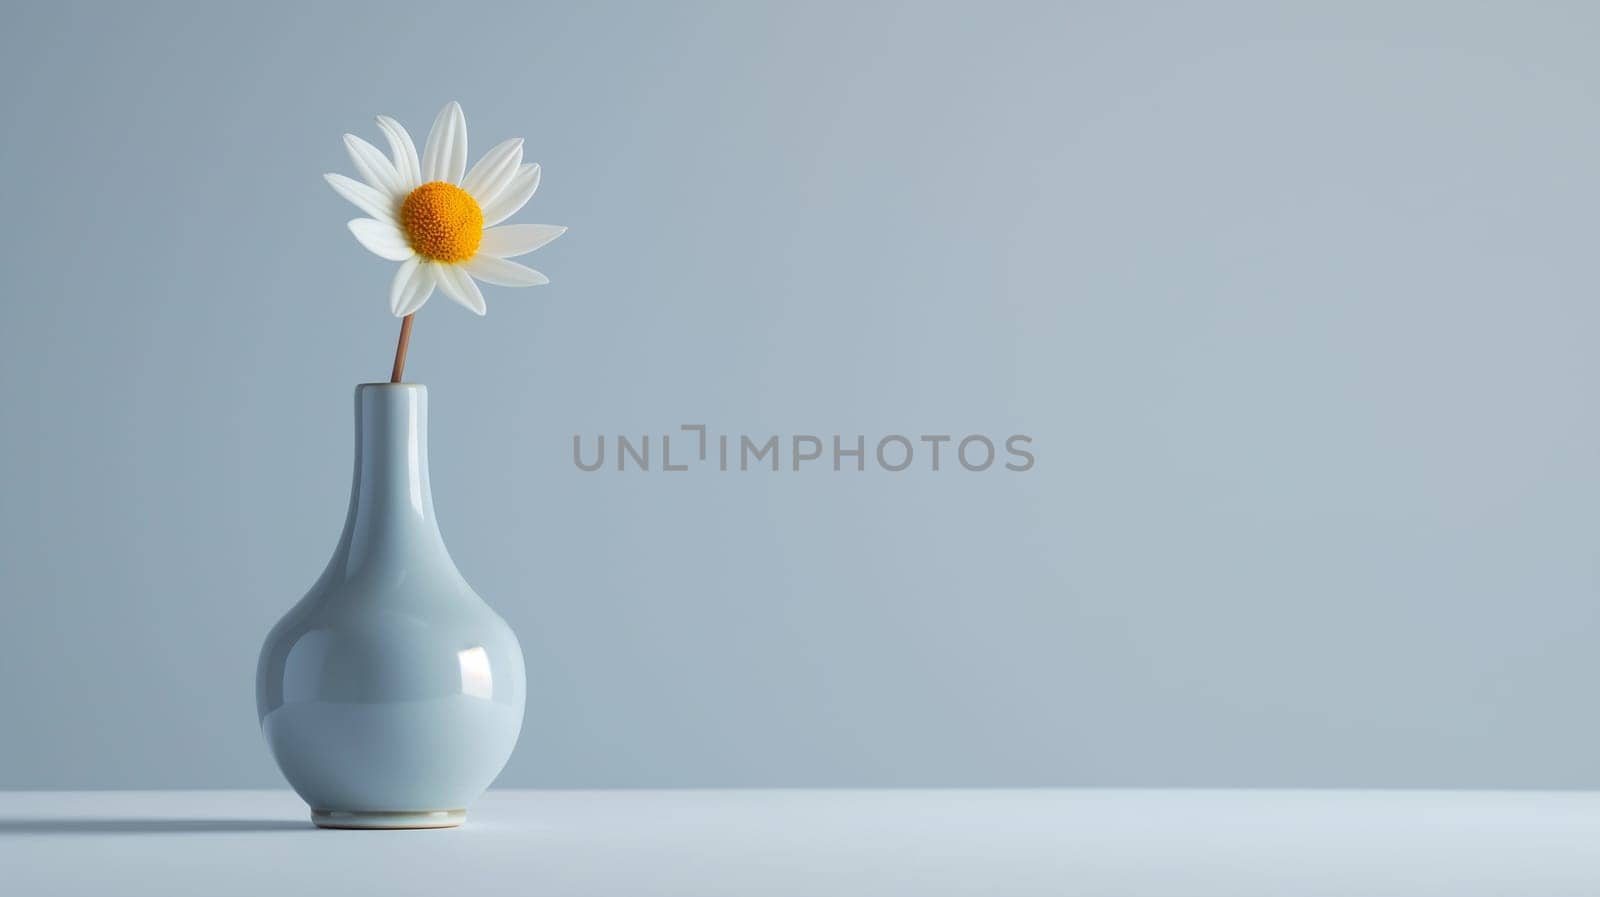 Elegant White Daisy in a Soft Blue Vase Against a Neutral Background by chrisroll